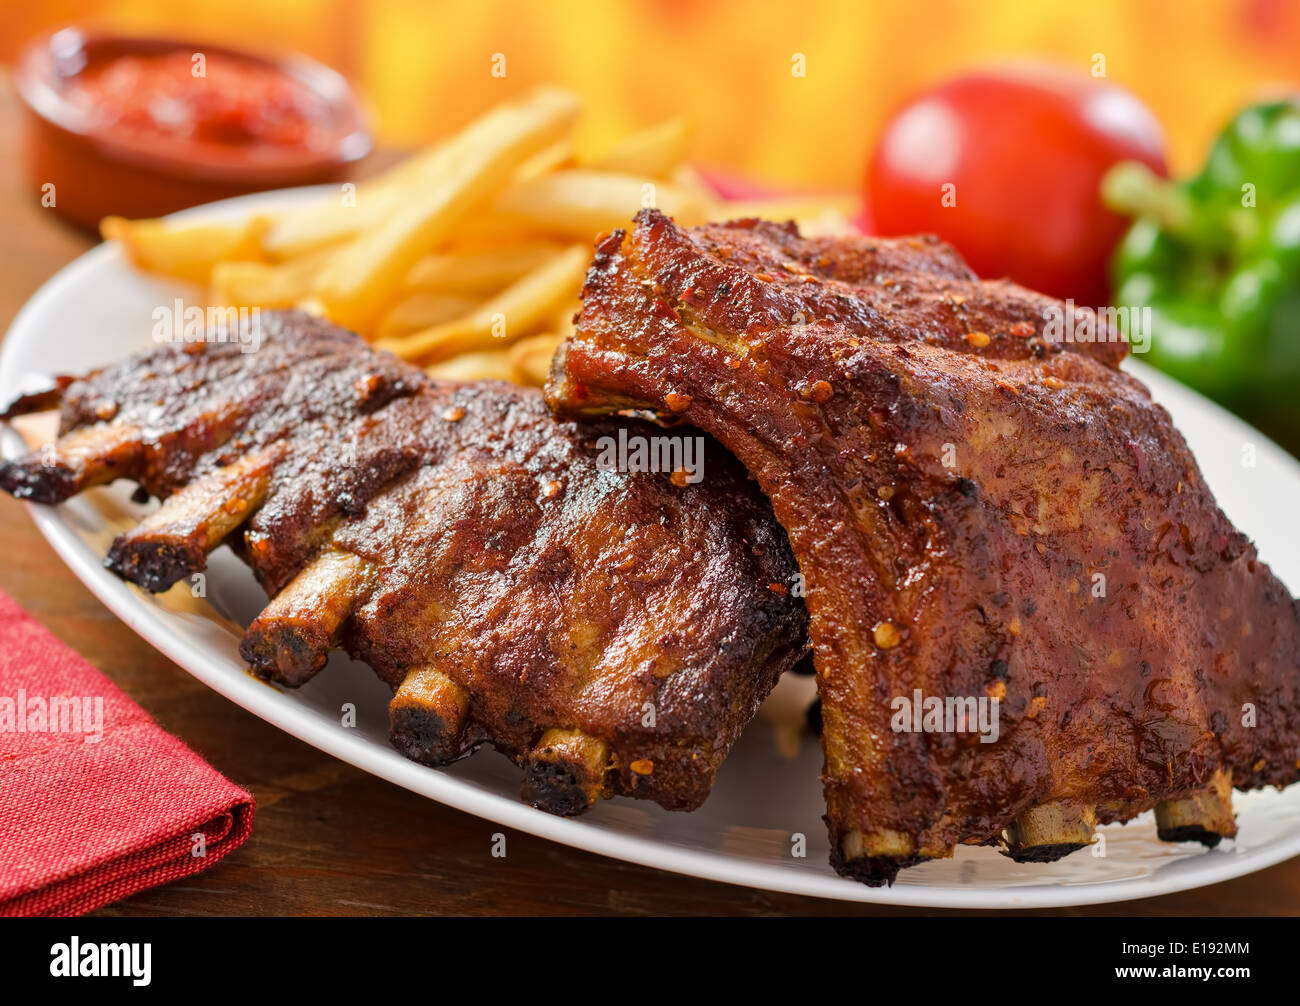 Barbecued pork baby back ribs against a hardwood fire background. Stock Photo